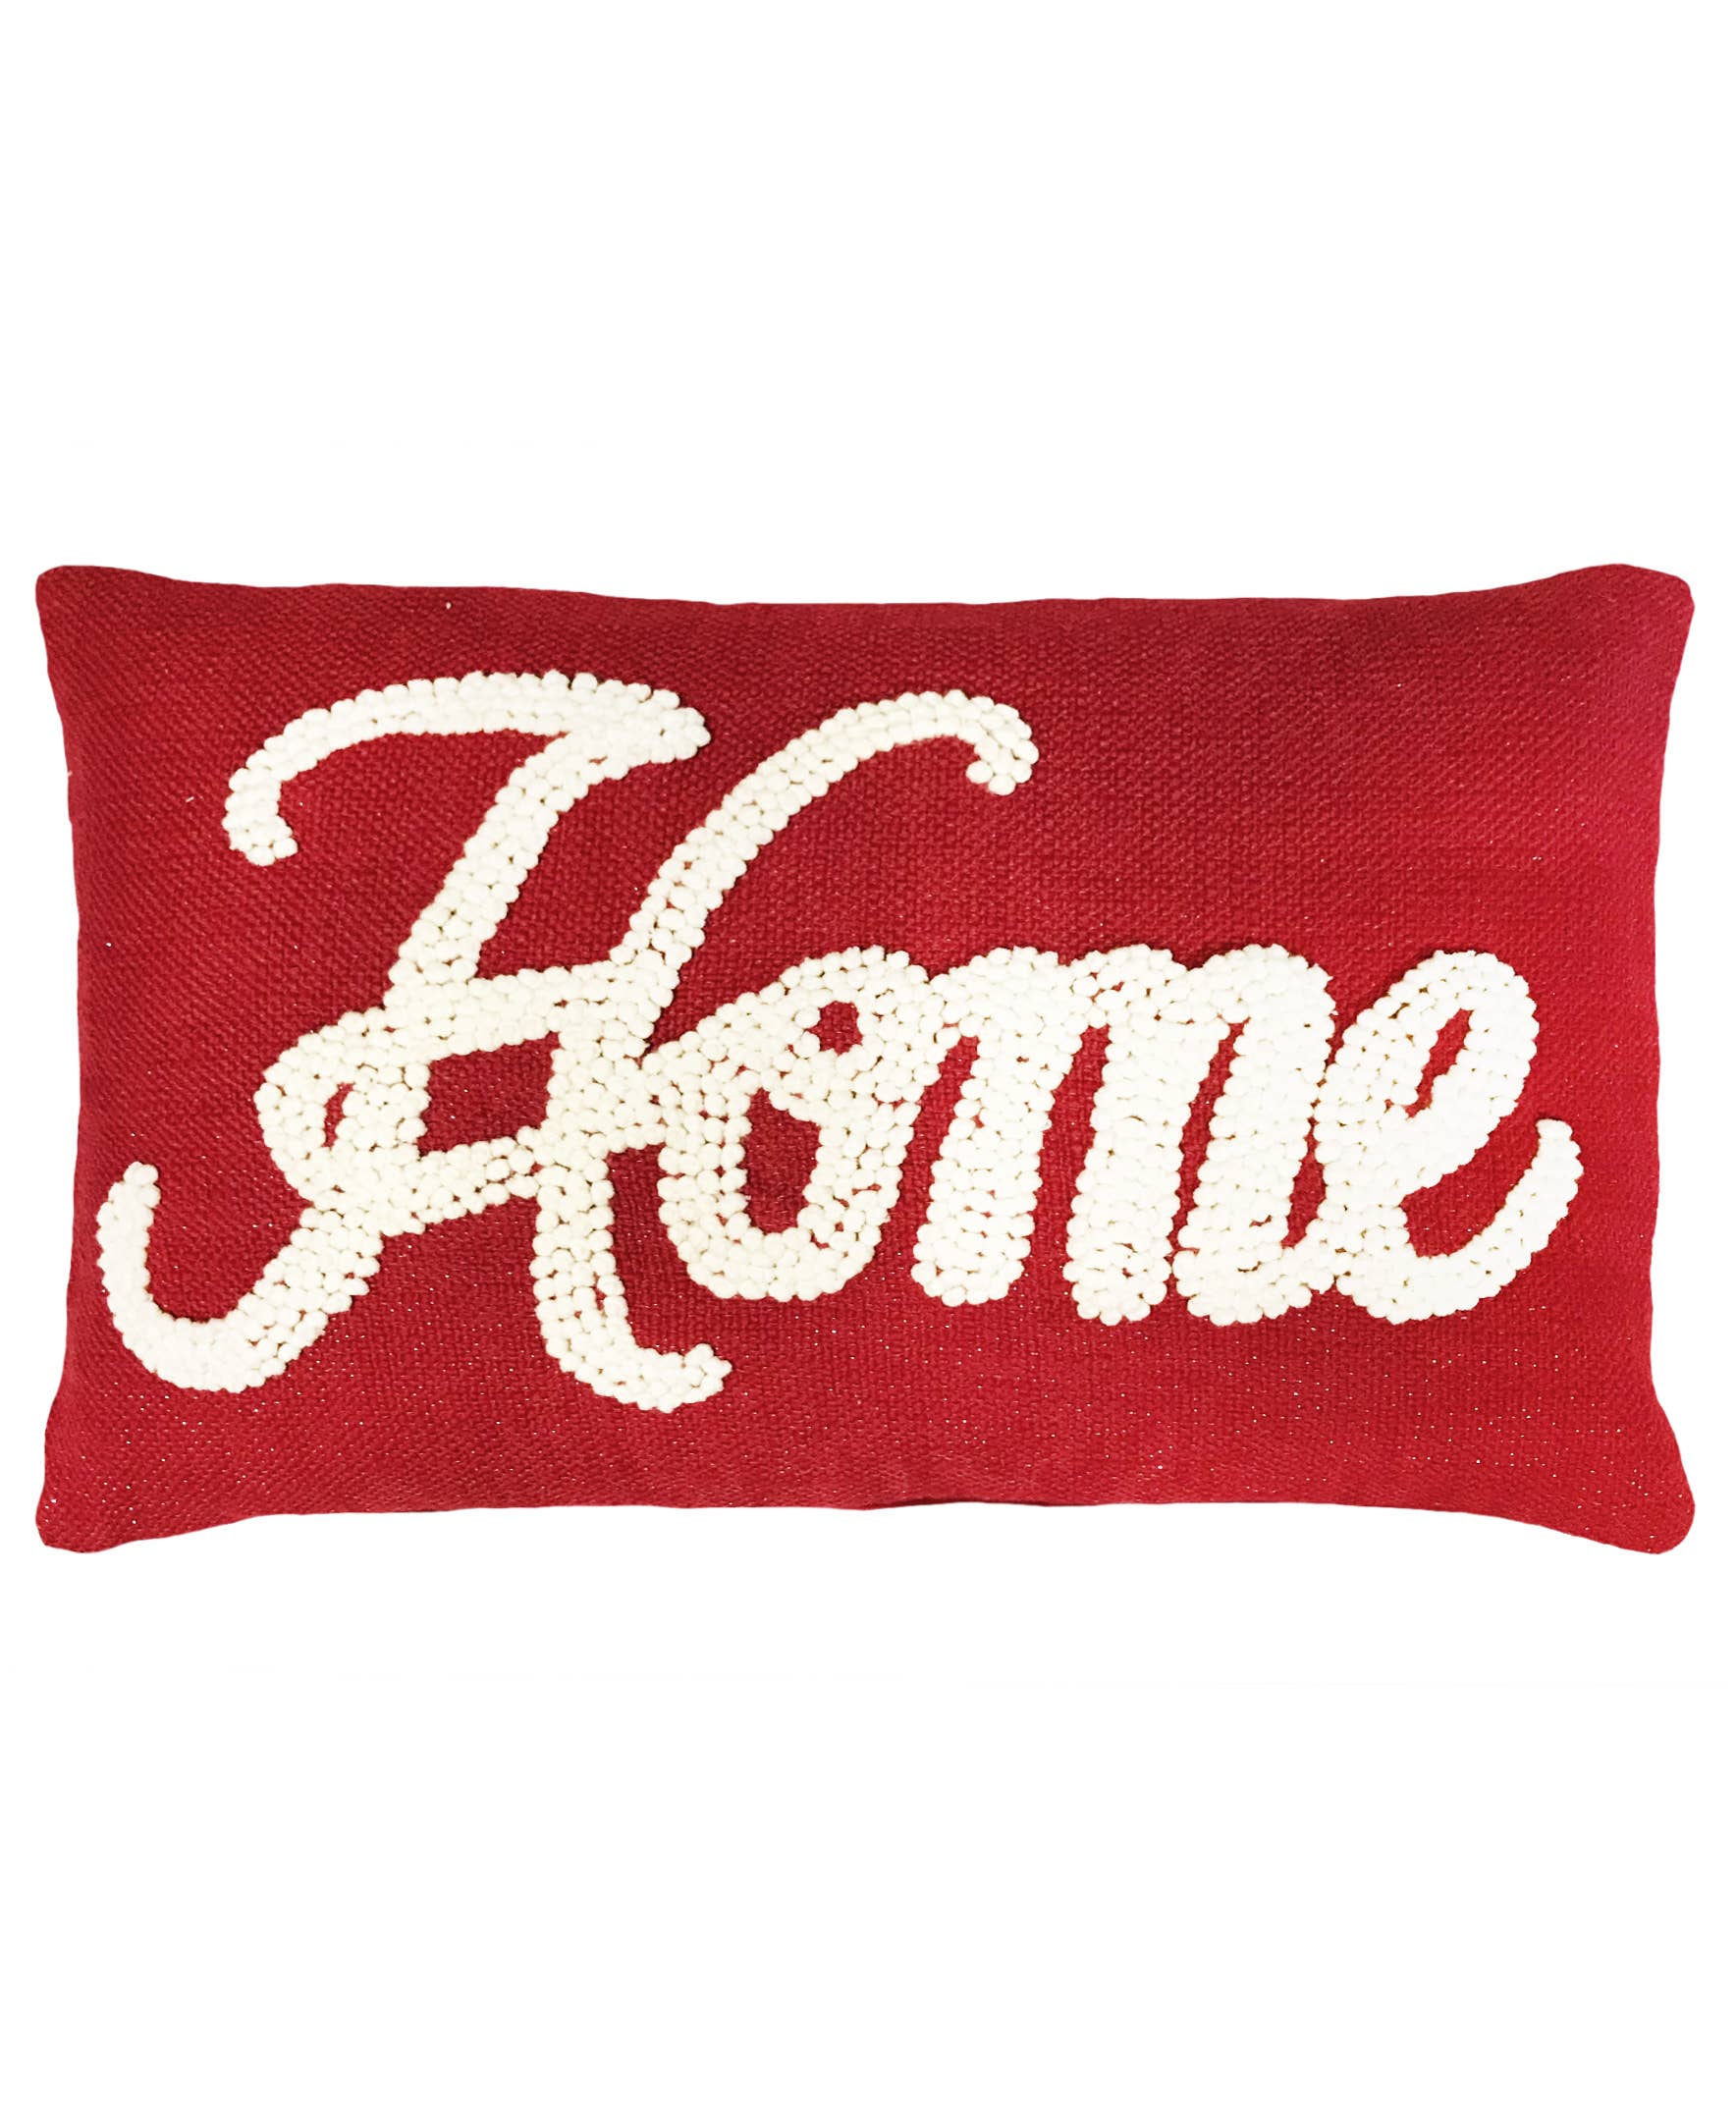 Home French Knot Embroidery Pillow